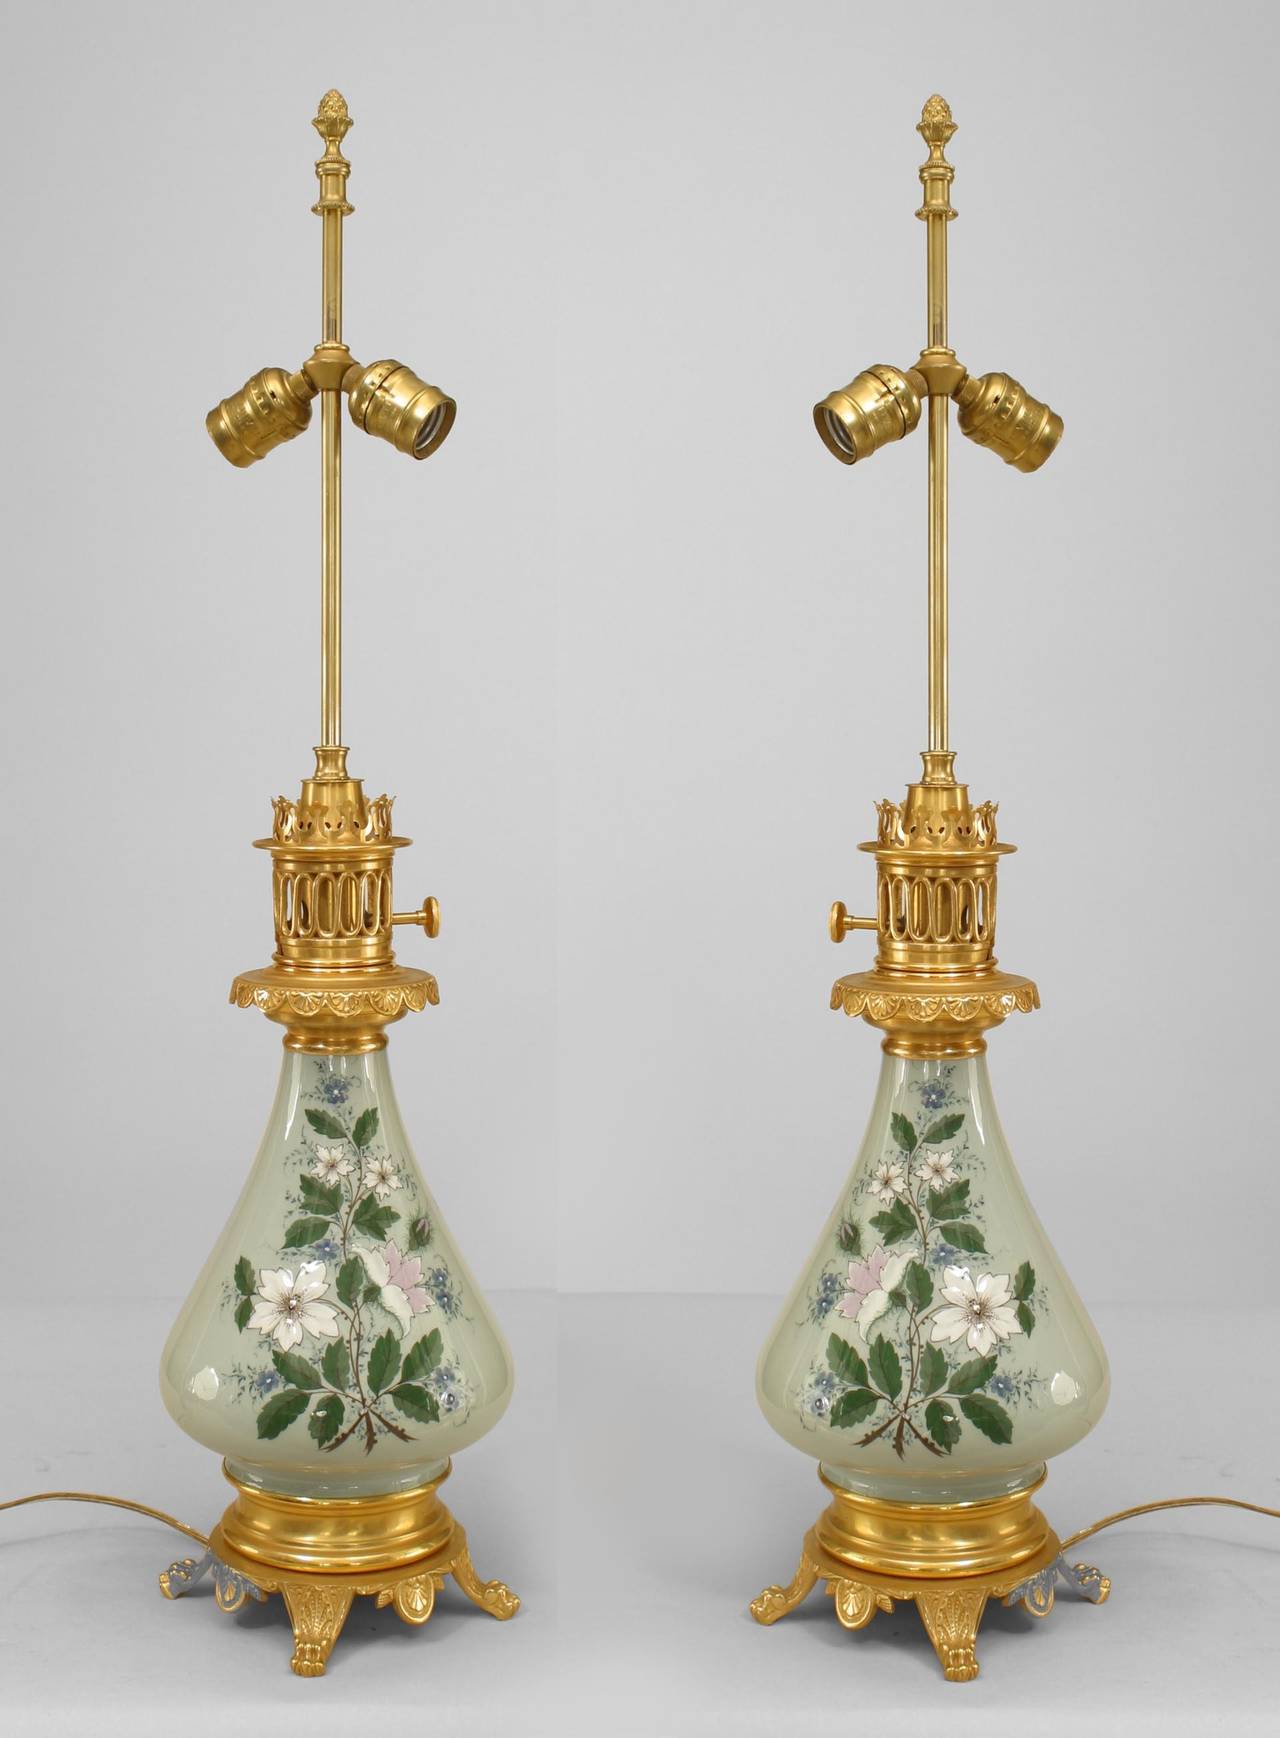 Pair of French Victorian porcelain pate-su-pate celadon lamps with floral decoration and gilt bronze base and trim. (Originally oil now wired for electric)(PRICED AS Pair).
